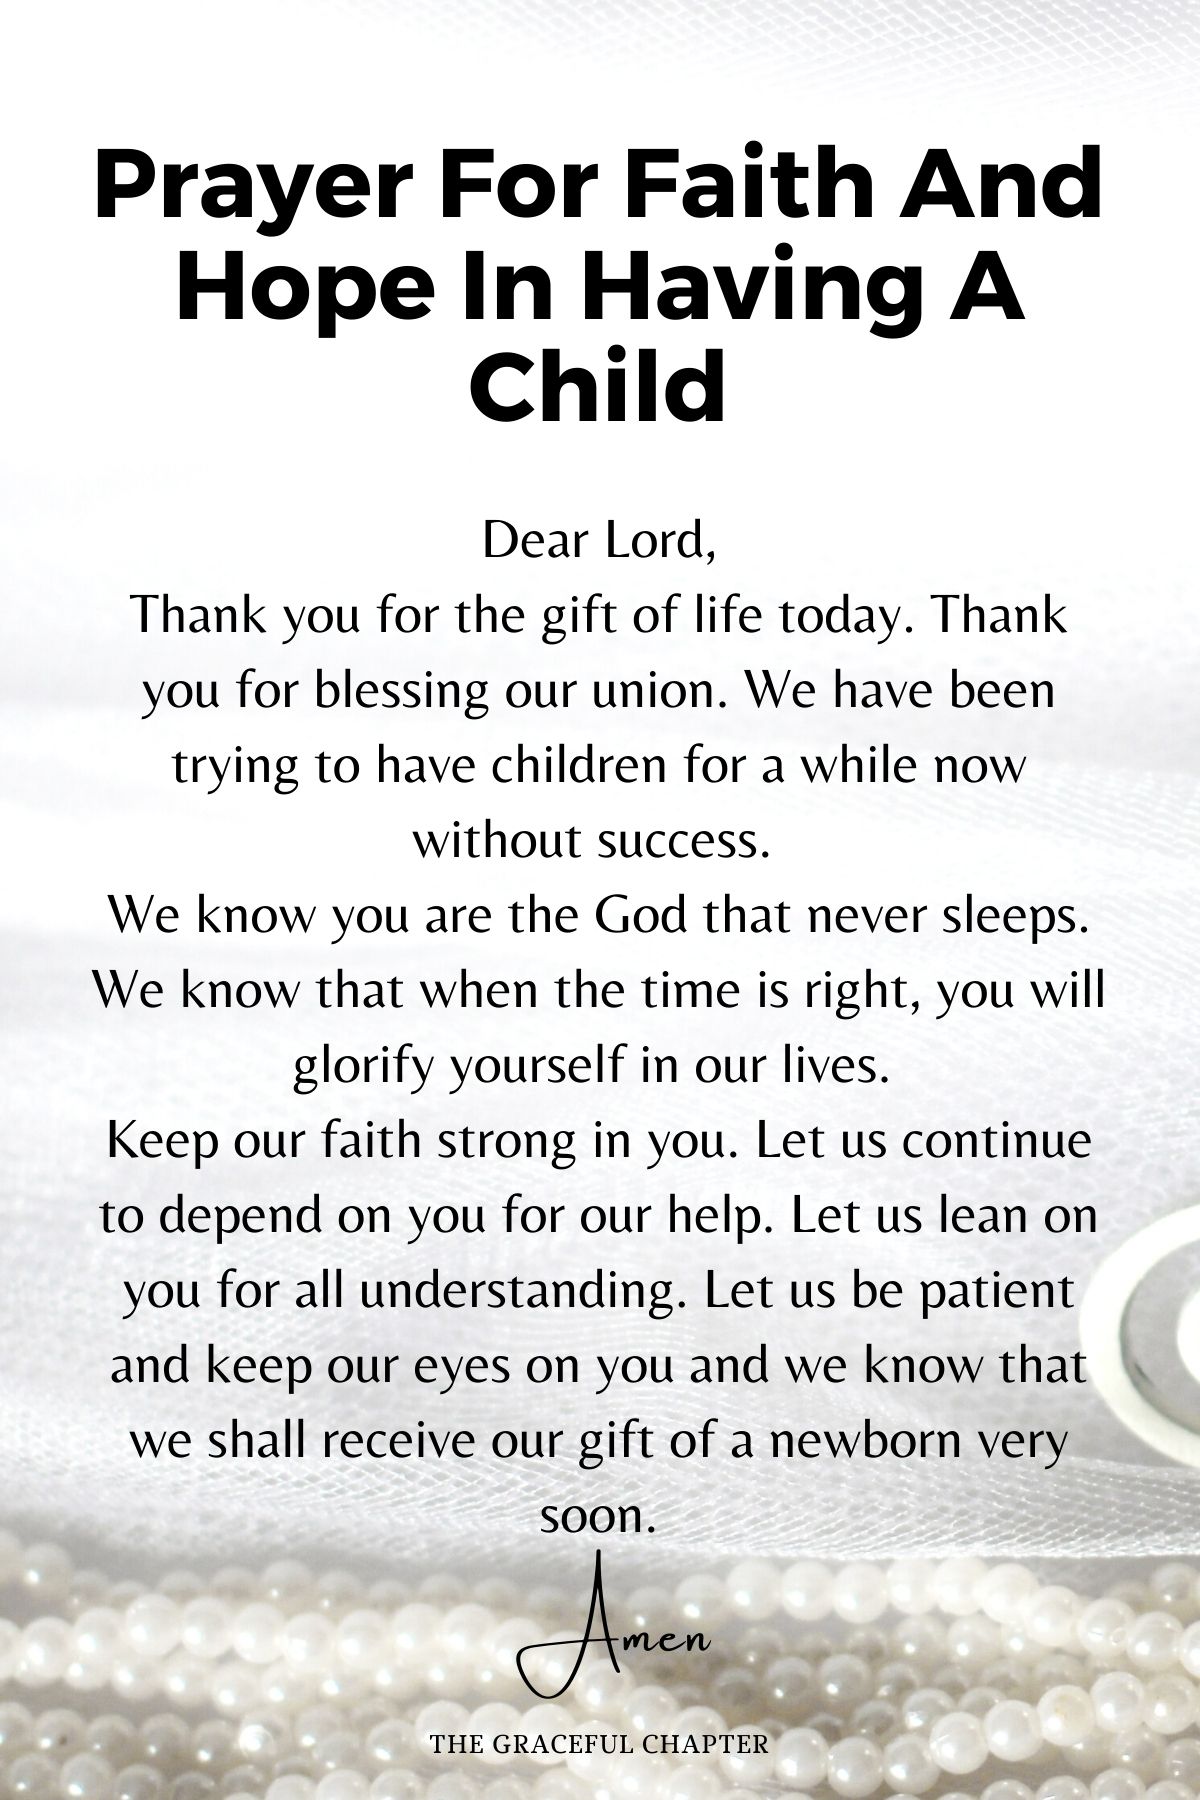 Prayer for faith and hope in having a child